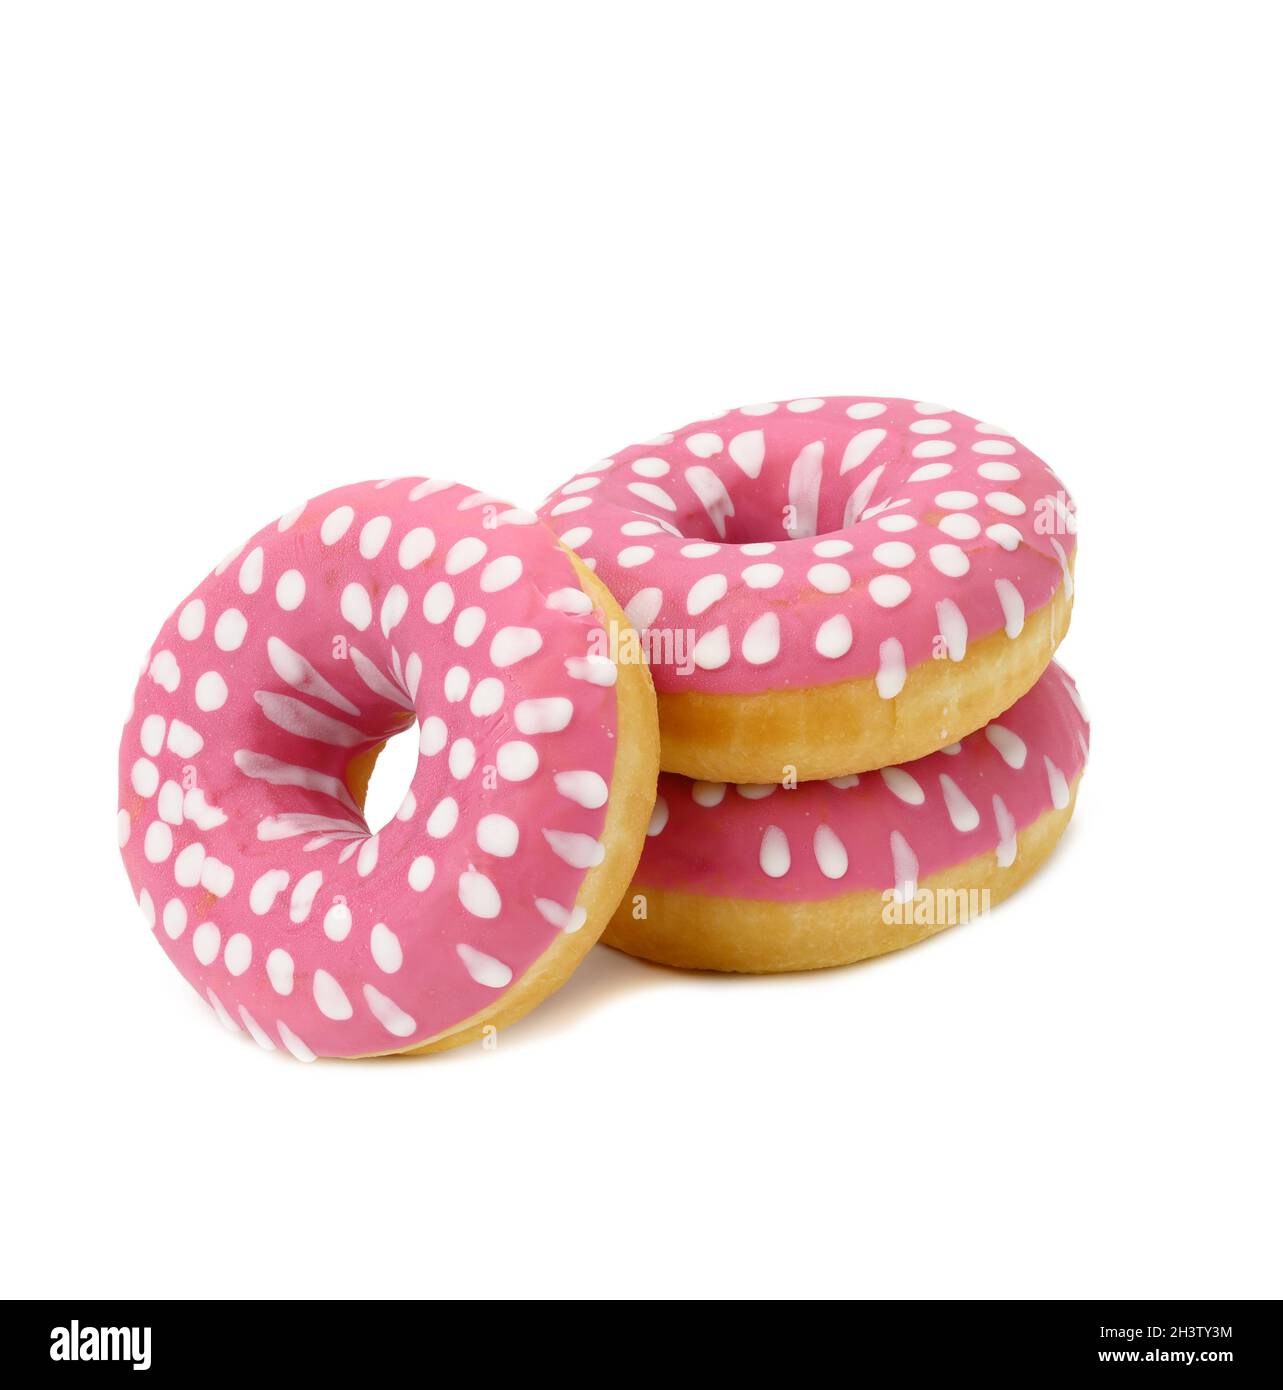 Baked round donut with pink icing and white dots isolated on white background Stock Photo